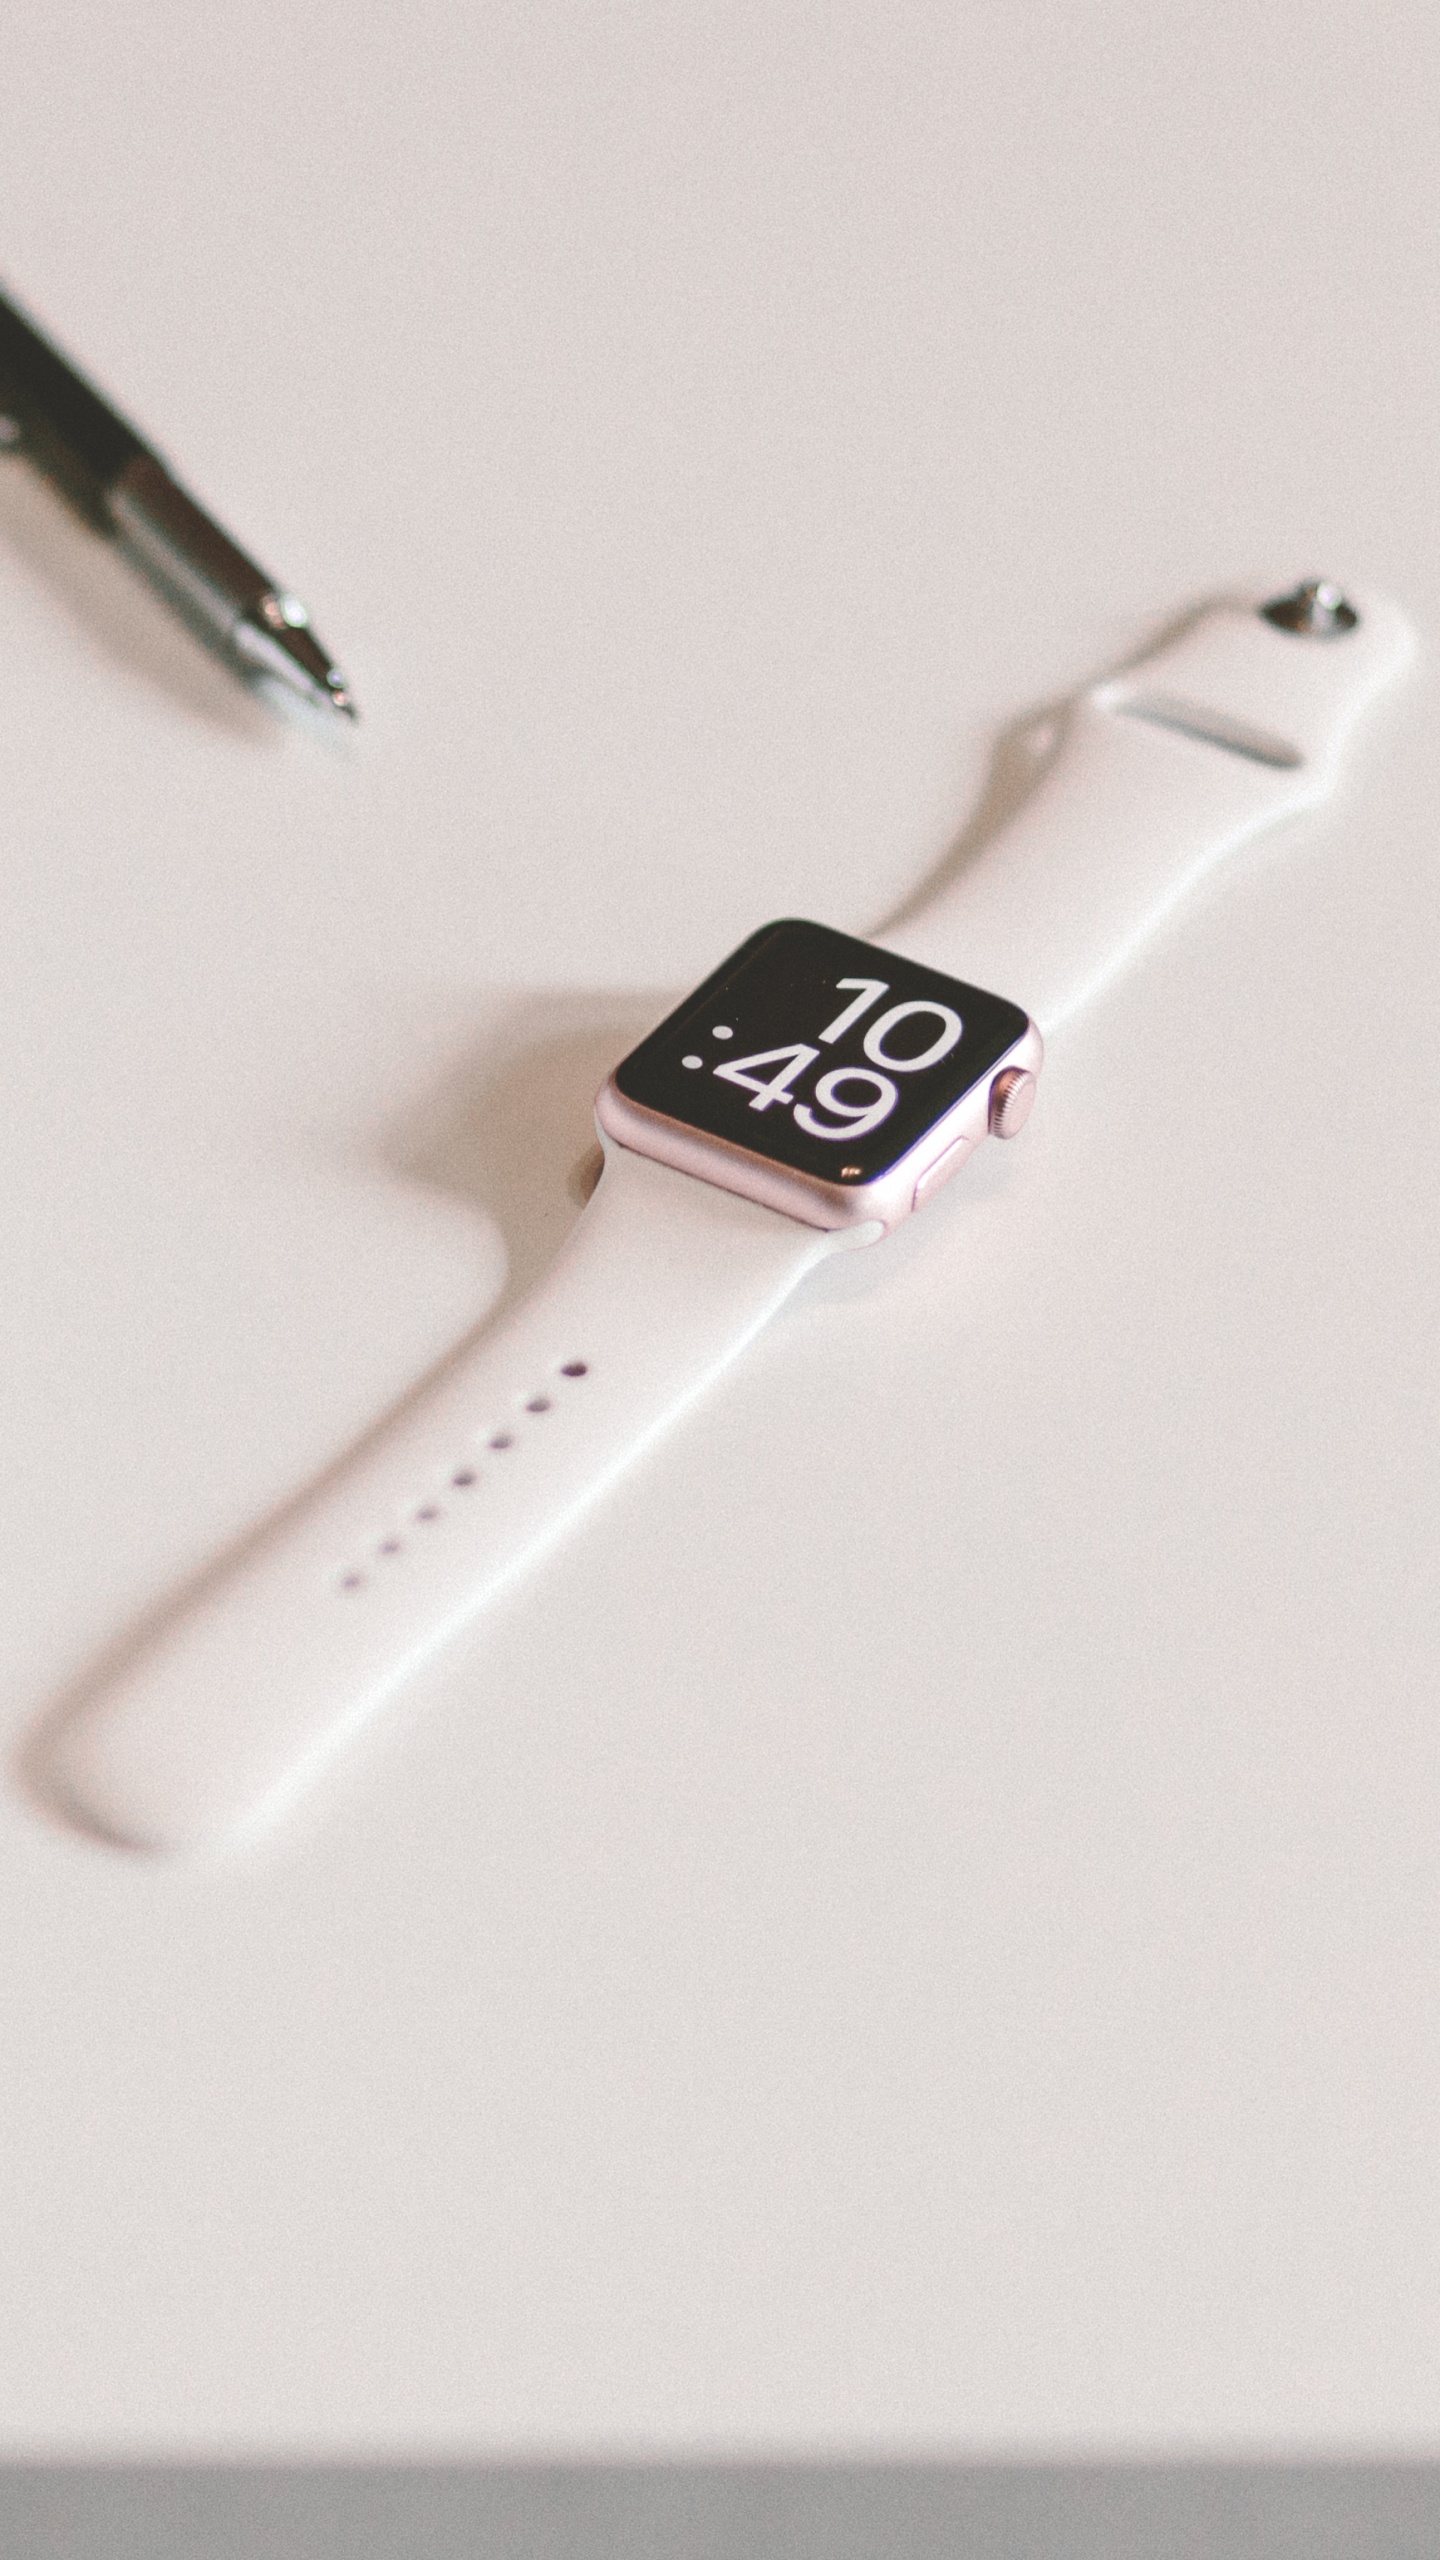 Silver Apple Watch With White Sport Band Beside Black Click Pen. Wallpaper in 1440x2560 Resolution